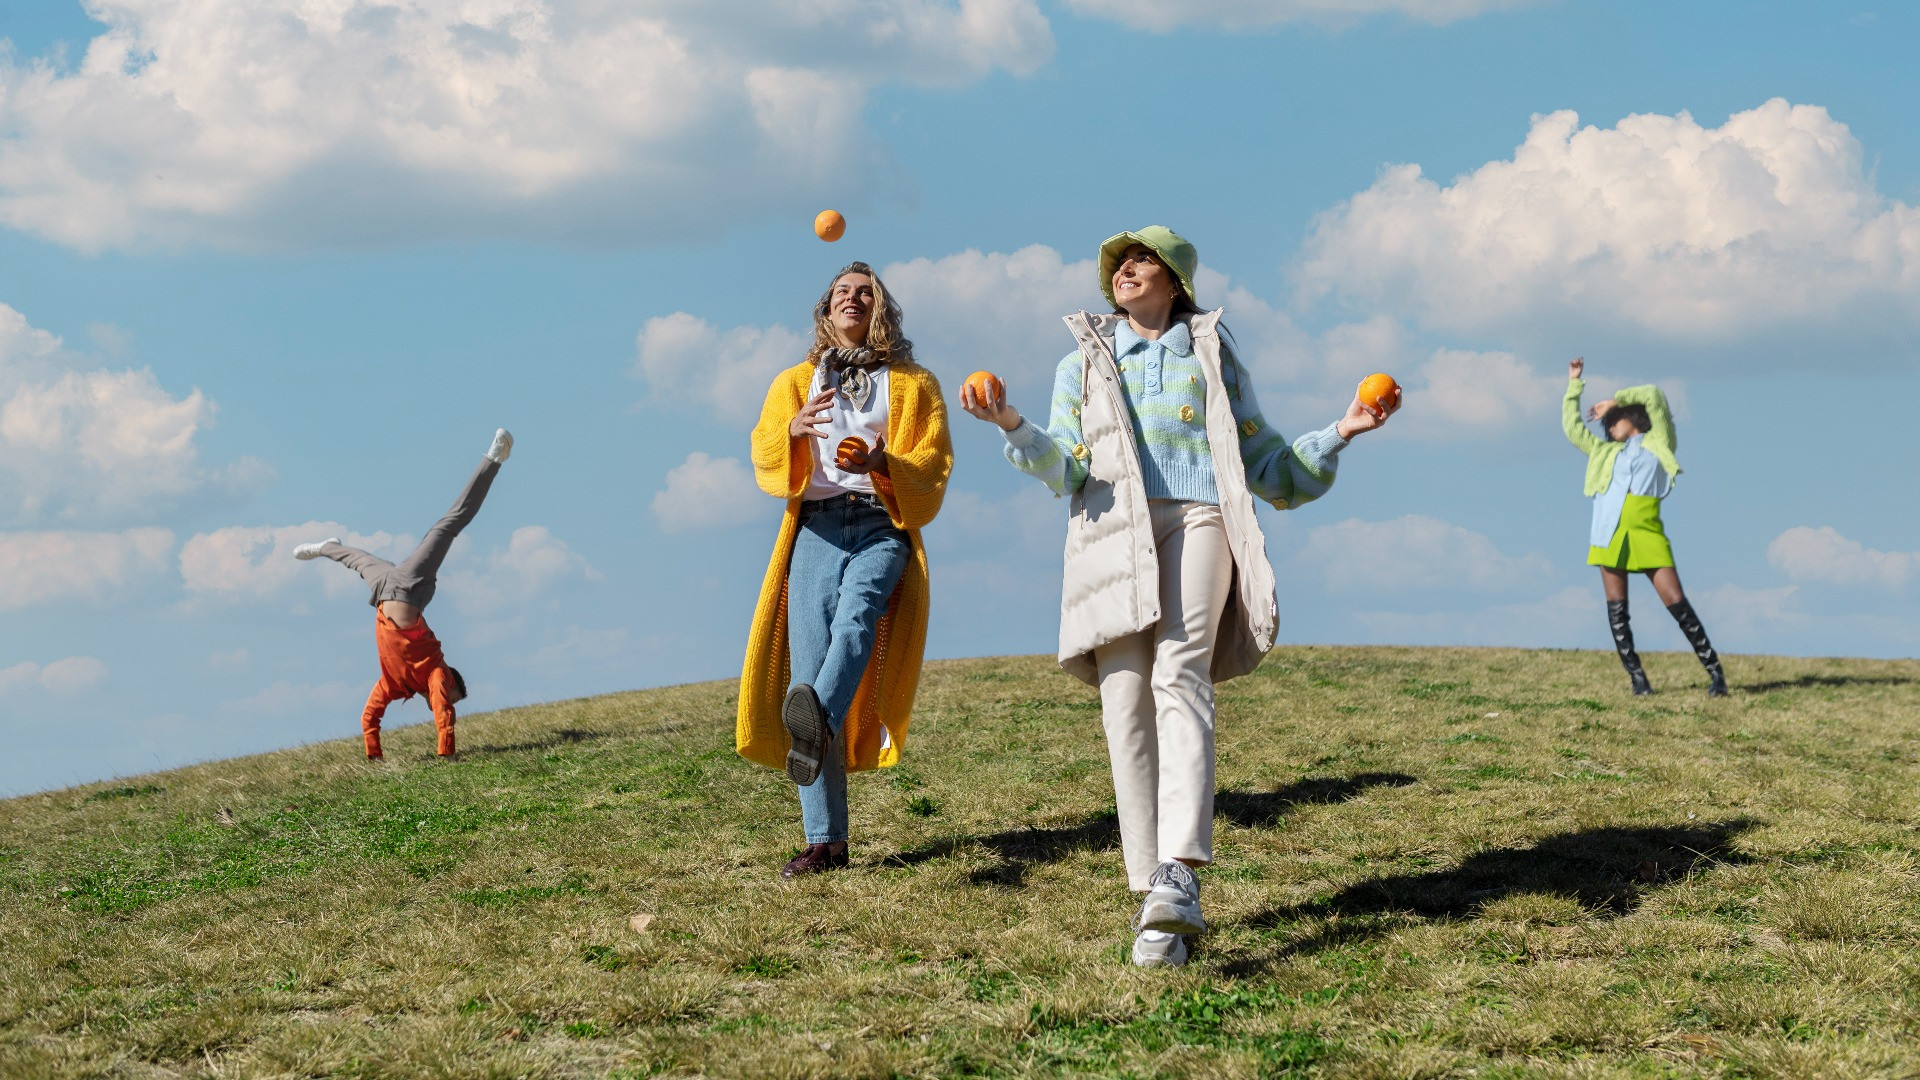 two-female-friends-playing-with-oranges-other-two-dancing-outdoor-field